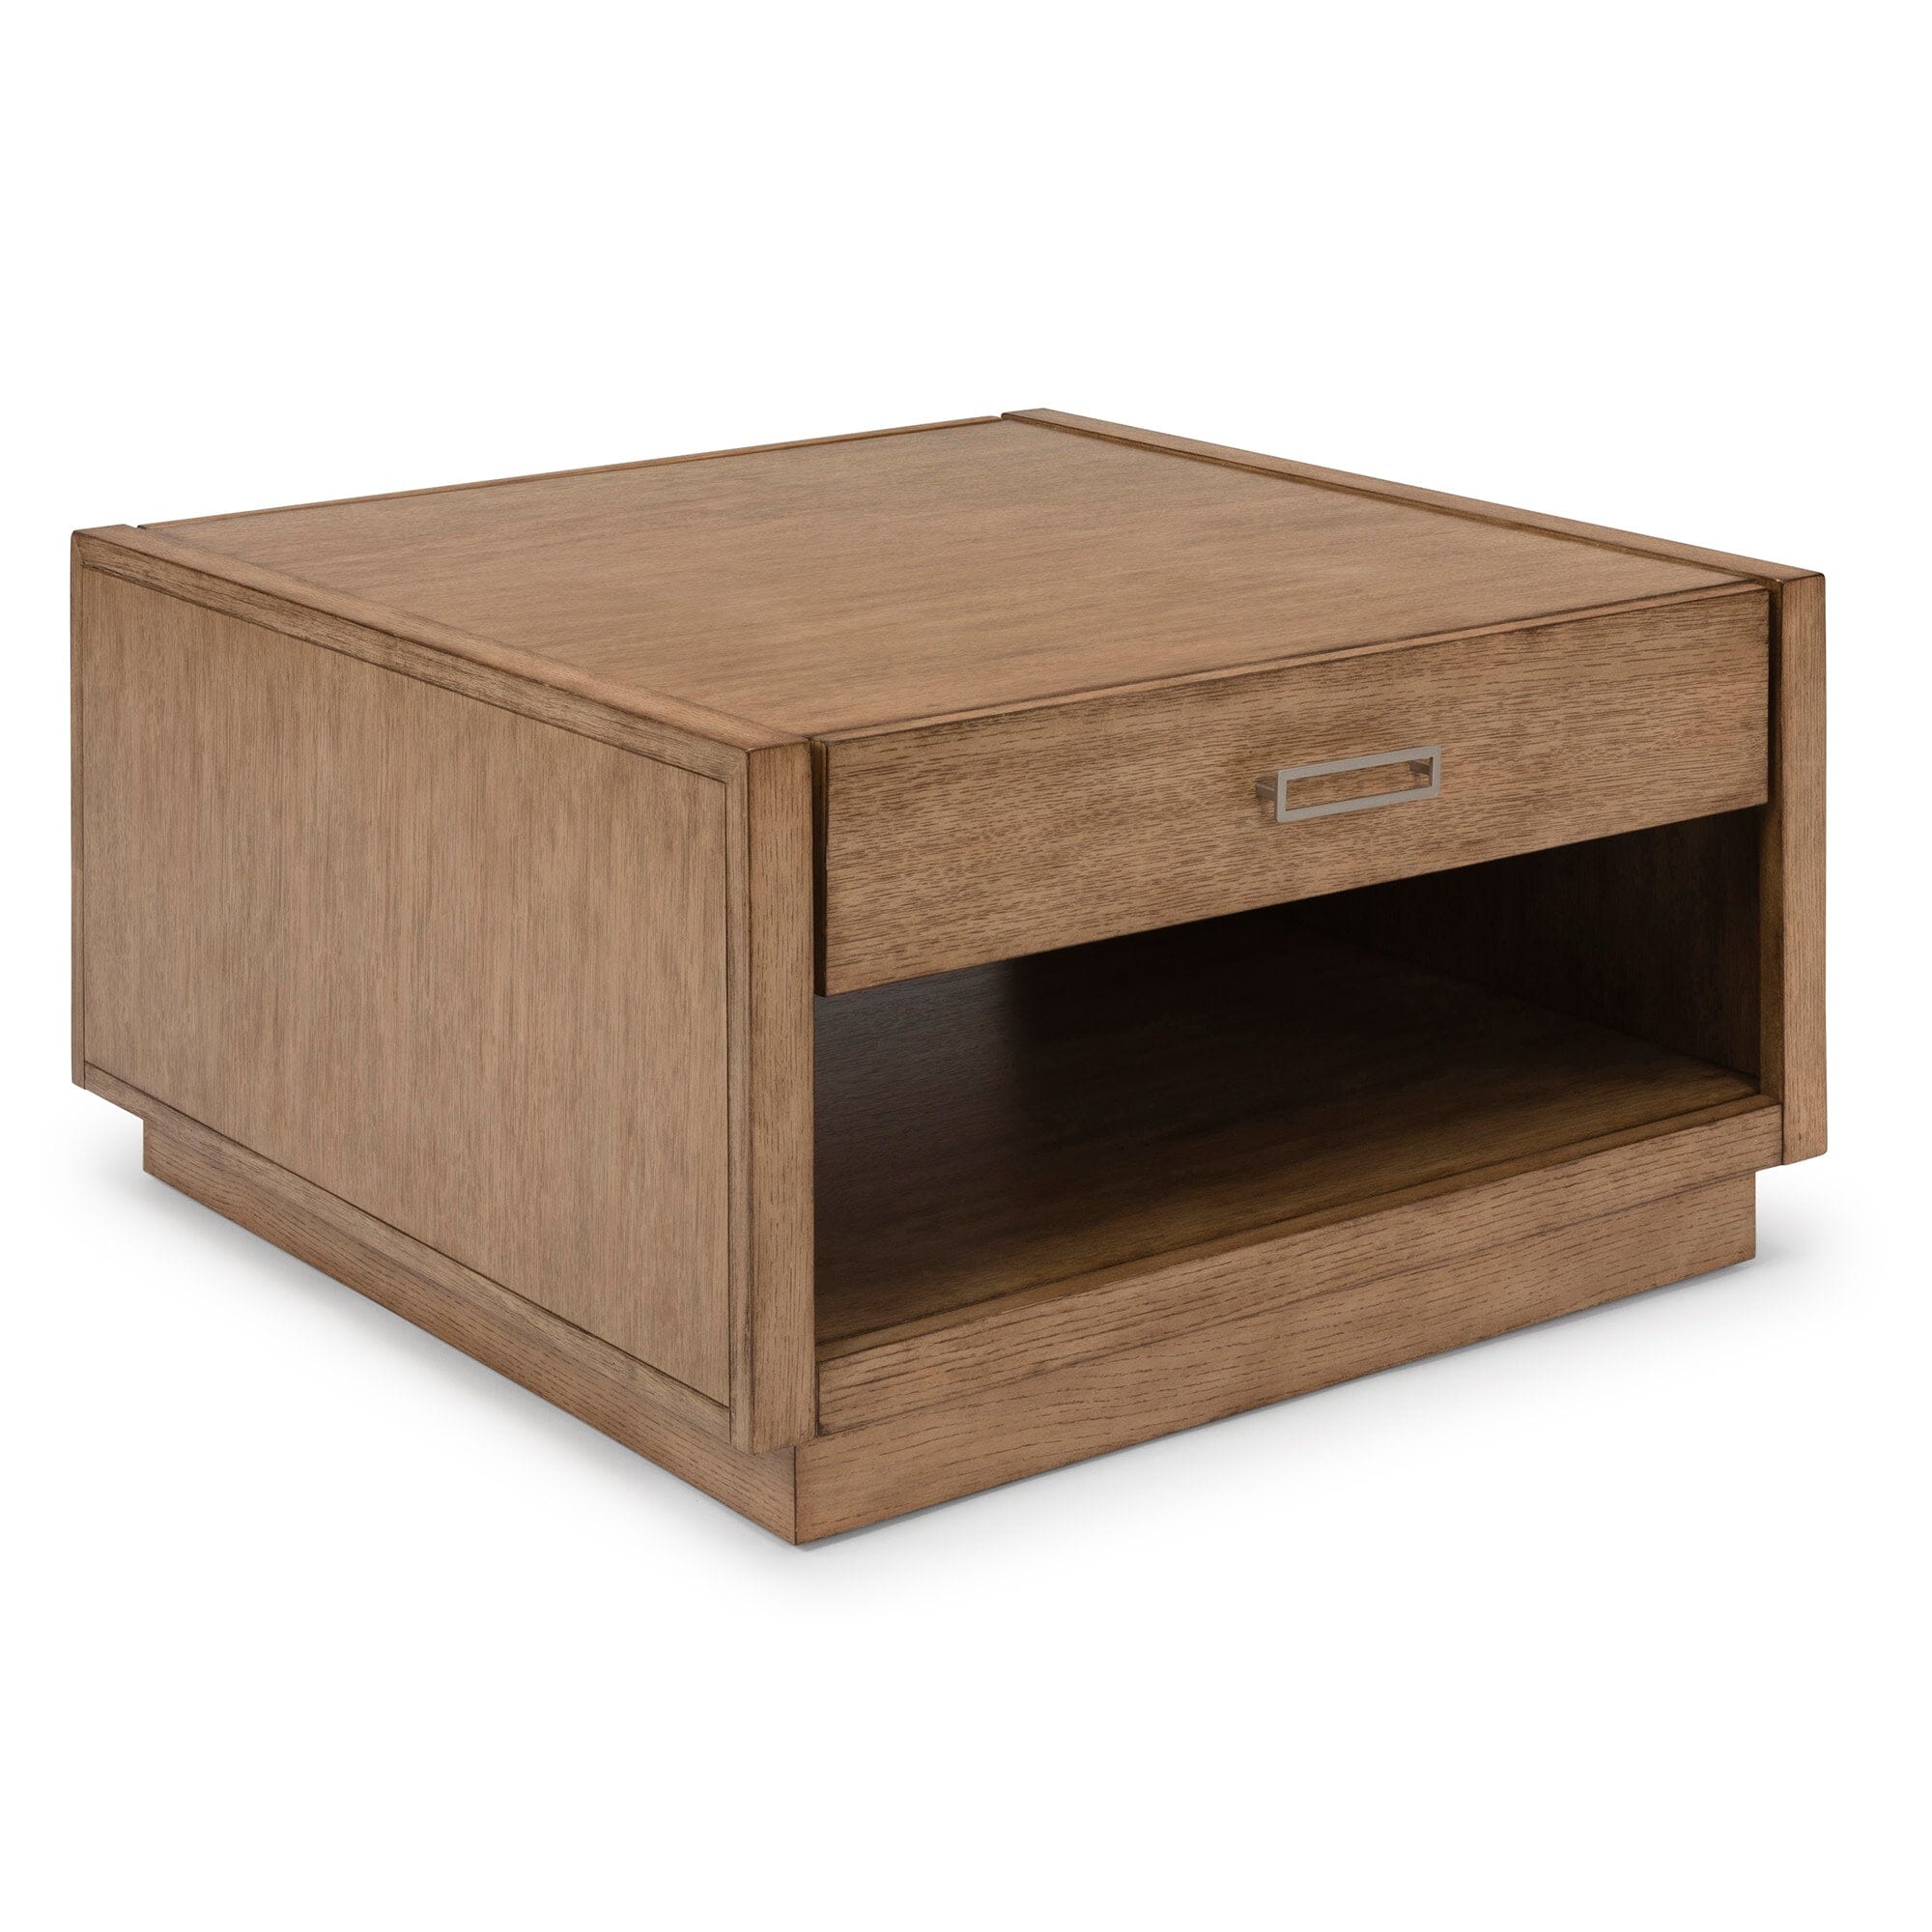 Modern & Contemporary Coffee Table By Big Sur Coffee Table Big Sur